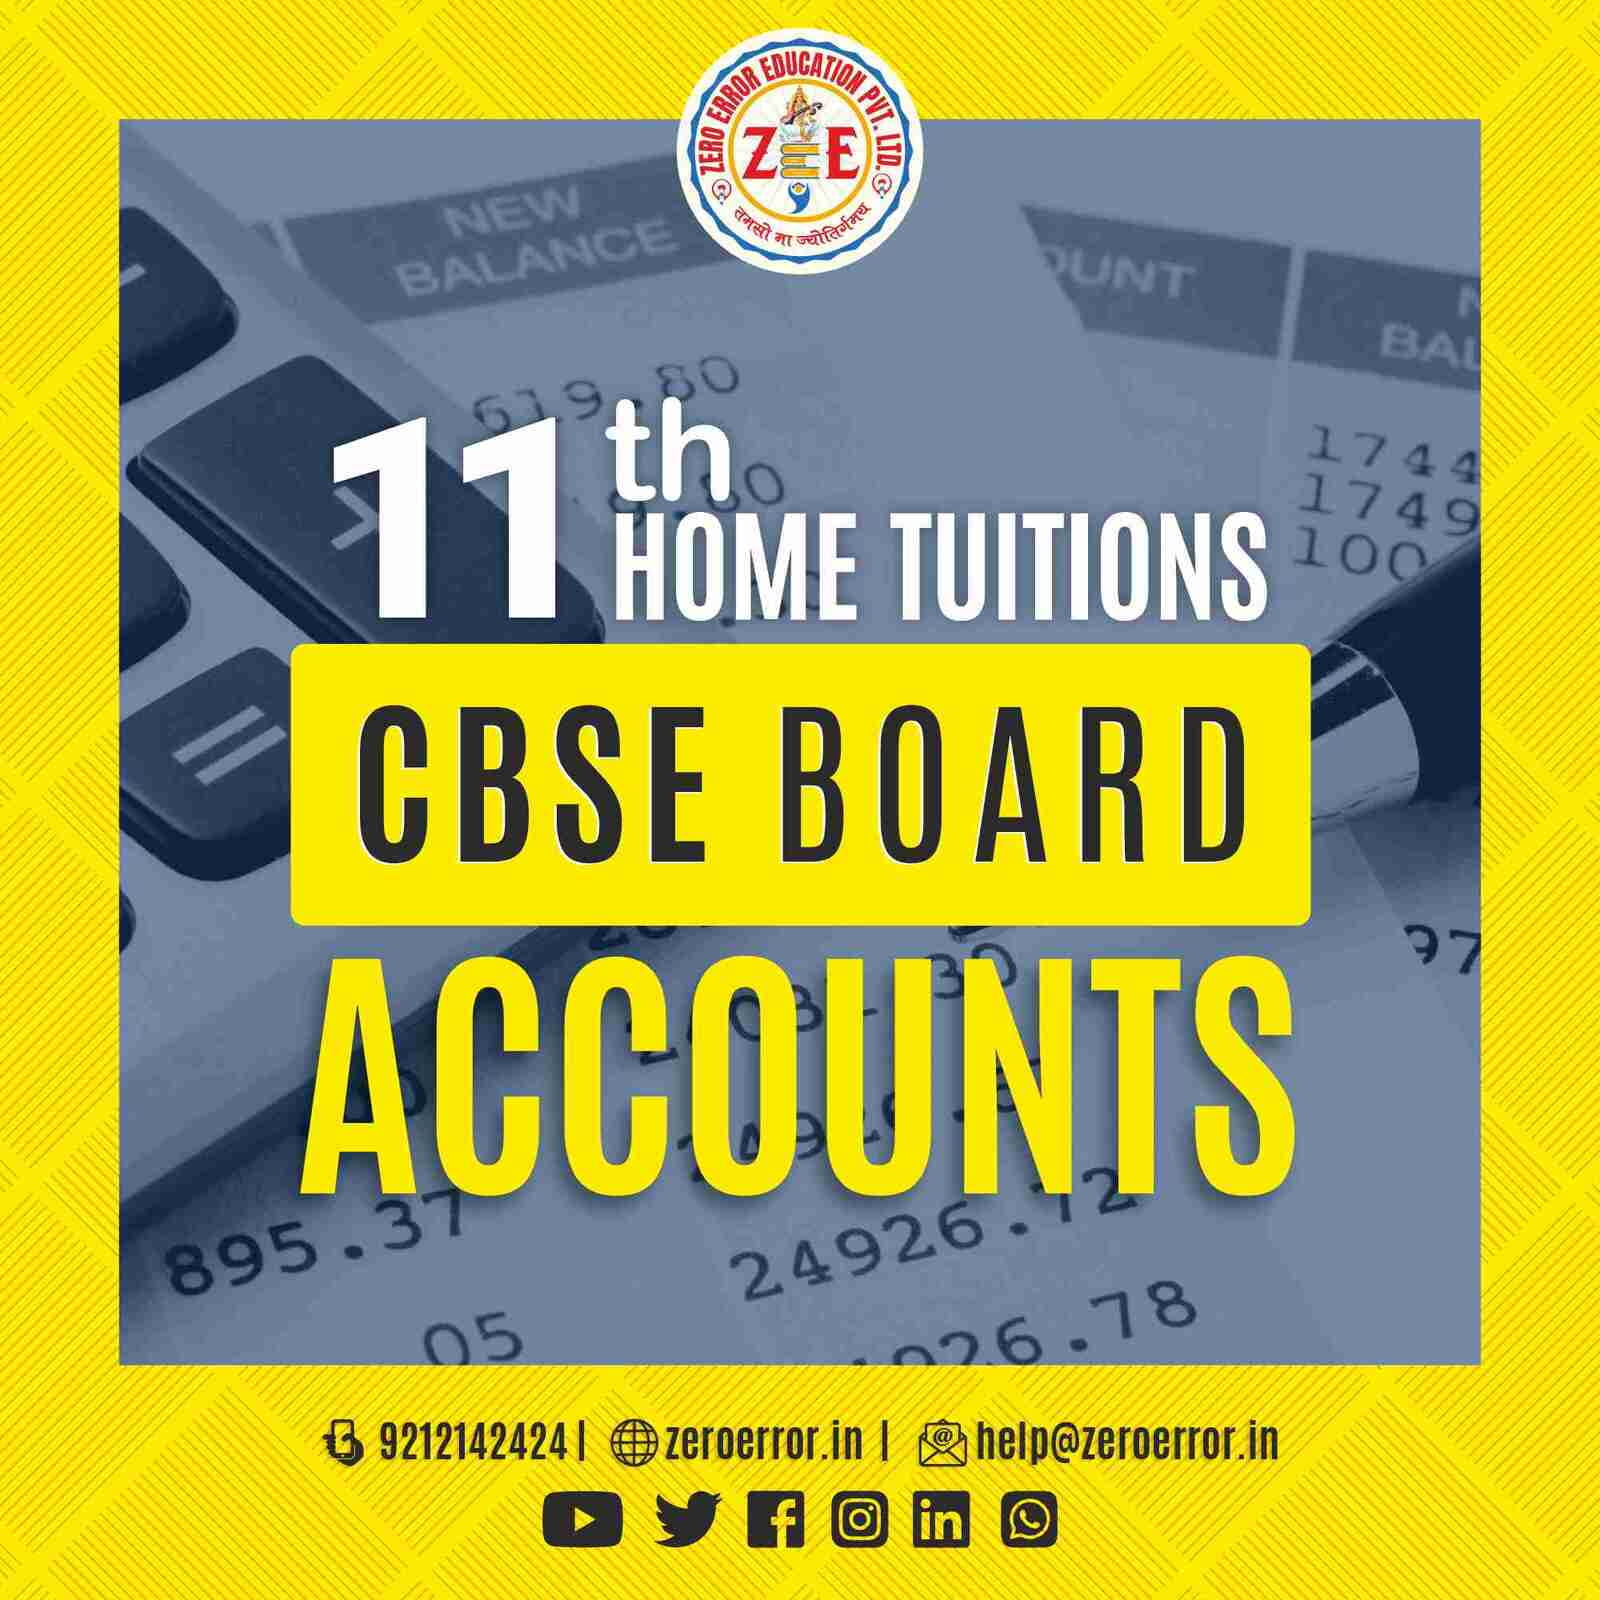 11th Grade CBSE Accounts Online Classes by Zero Error Education Prepare for your CBSE board exams with online and offline Accounts classes for 11th grade. Learn from experienced home tutors and get all the help you need to succeed. Enroll today at Zero Error Education. [https://zeroerror.in/] Call 9212142424 for more information.